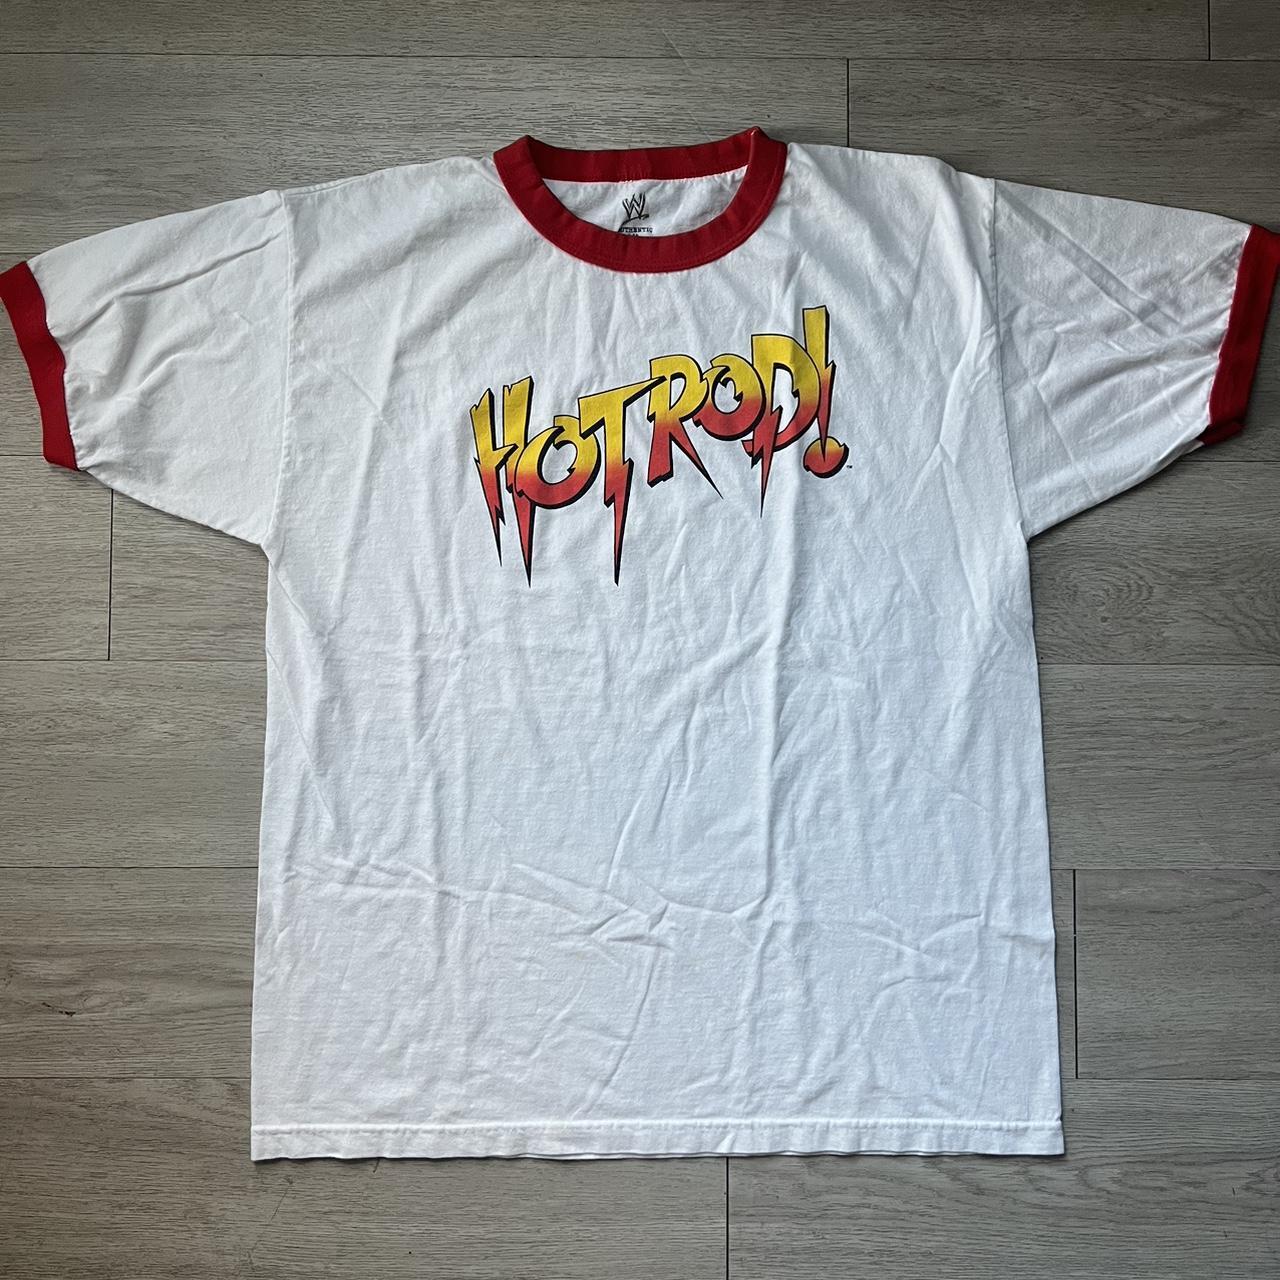 American Vintage Men's White and Red T-shirt | Depop